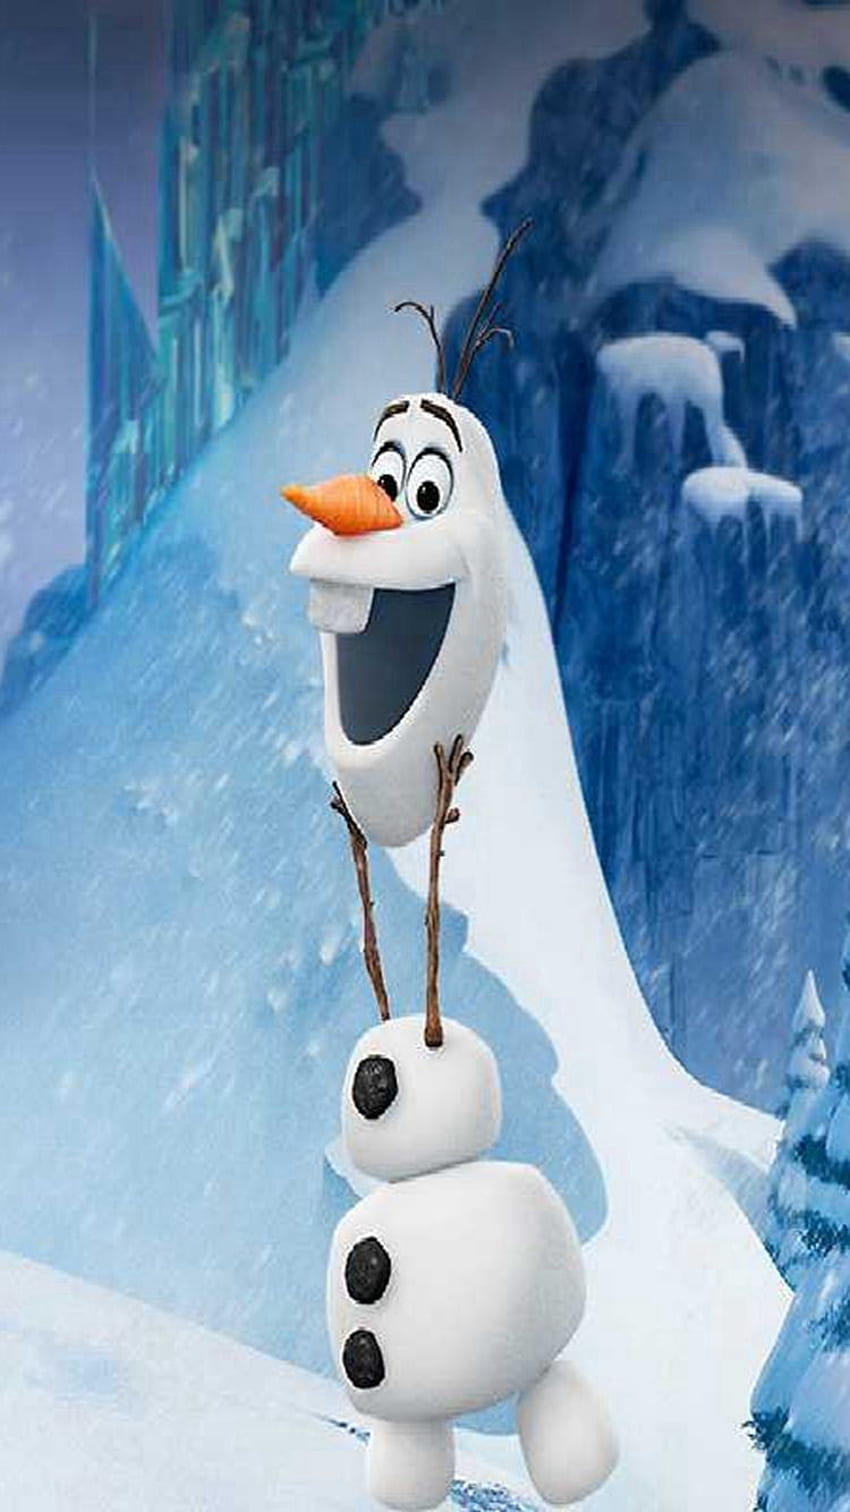 FROZEN, In Summer Song - Olaf